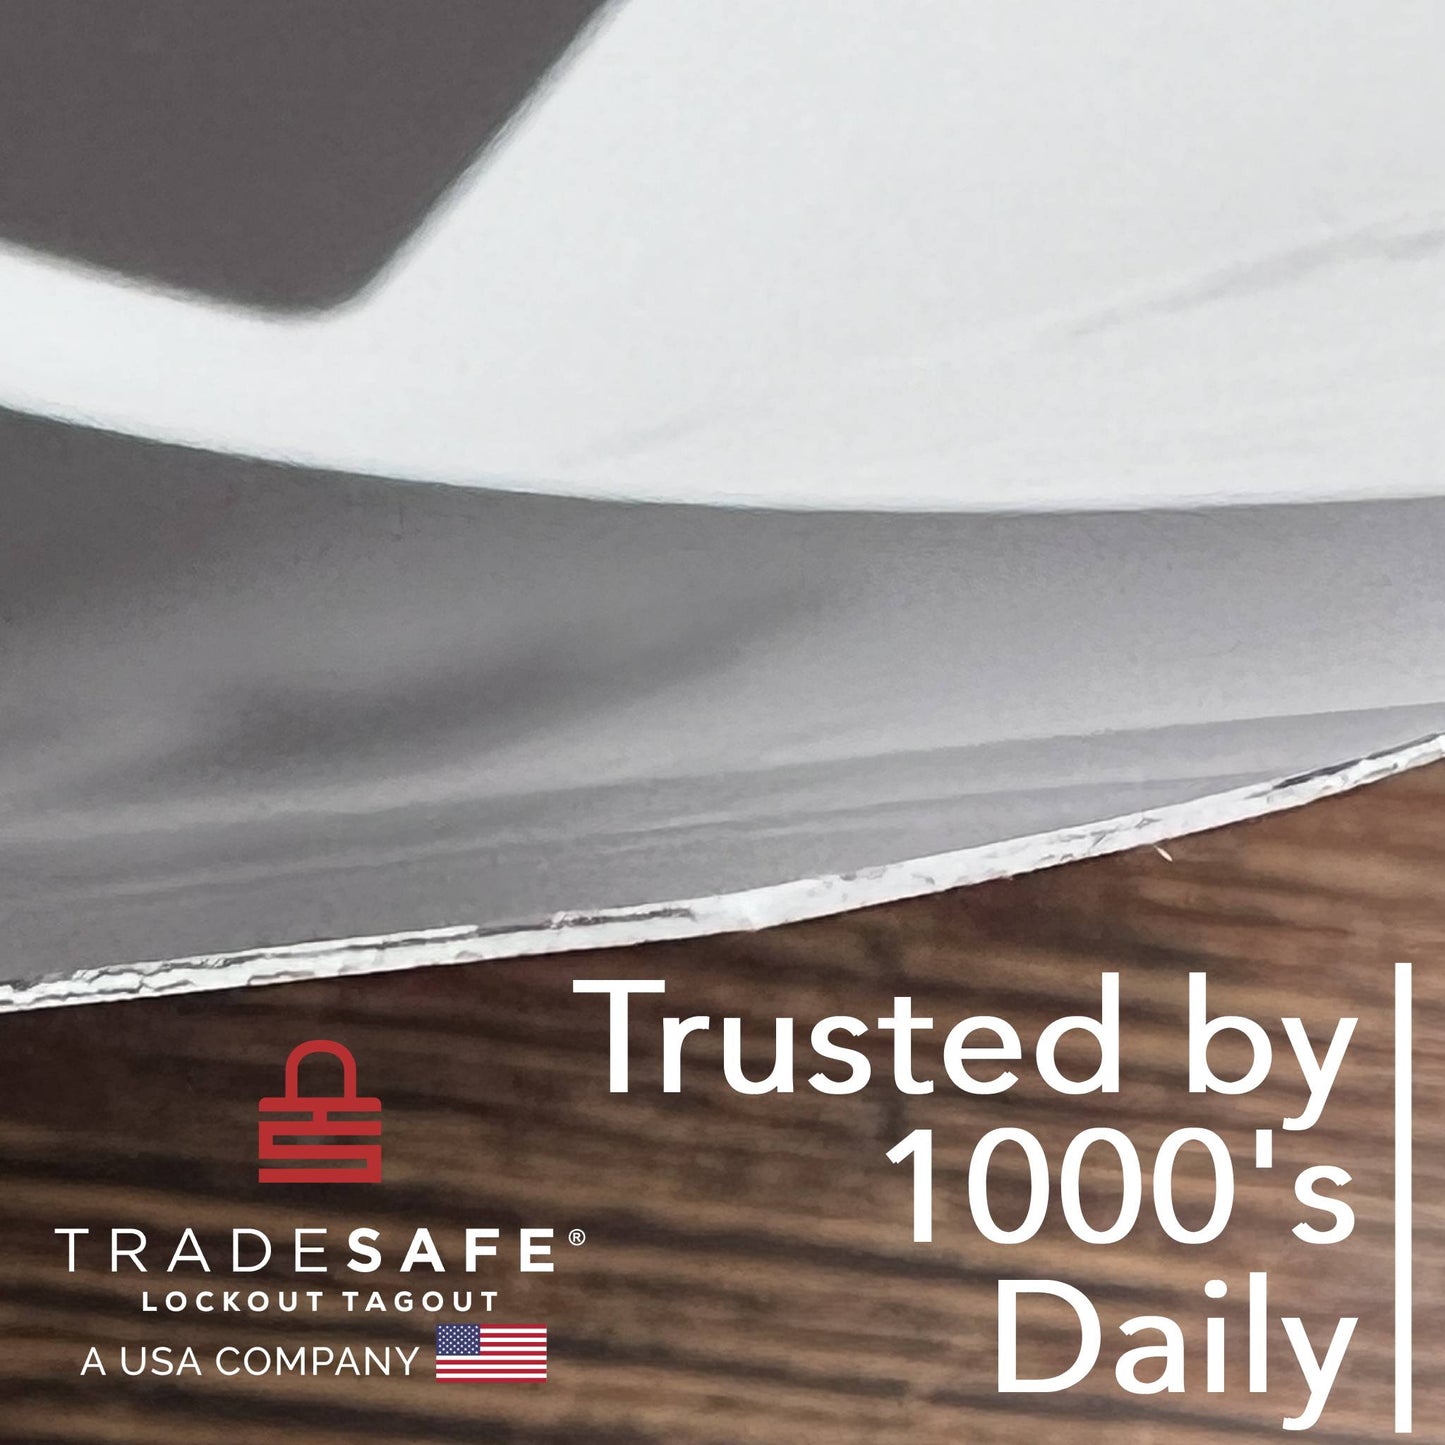 tradesafe loto poster brand image with text; trusted by 1000s daily